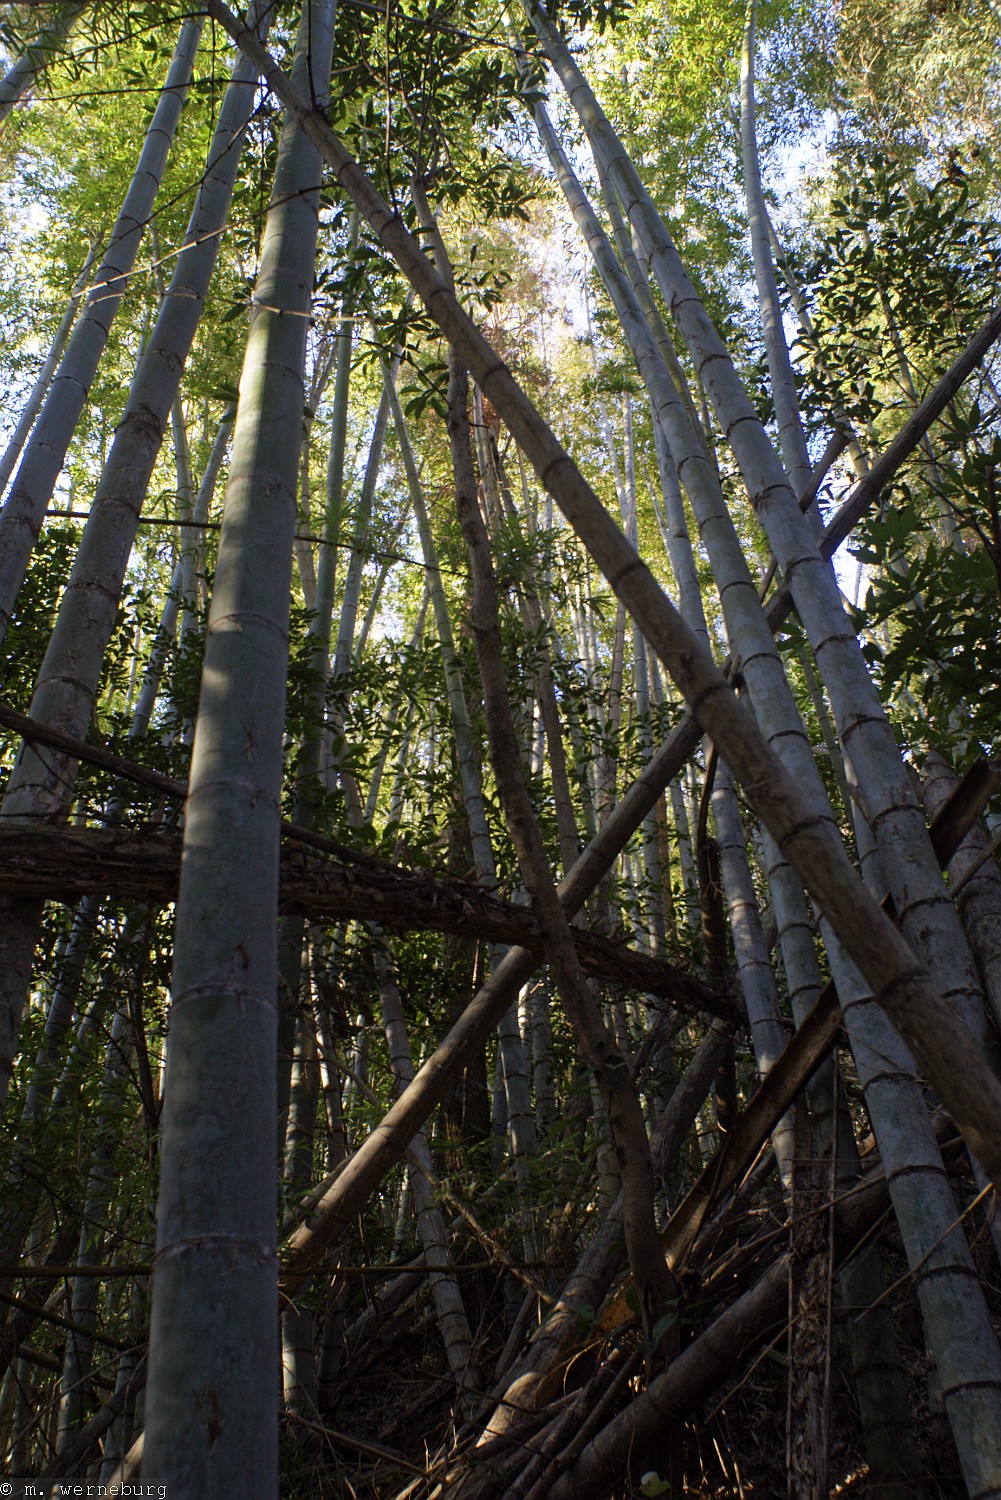 bamboo makes for messy forests